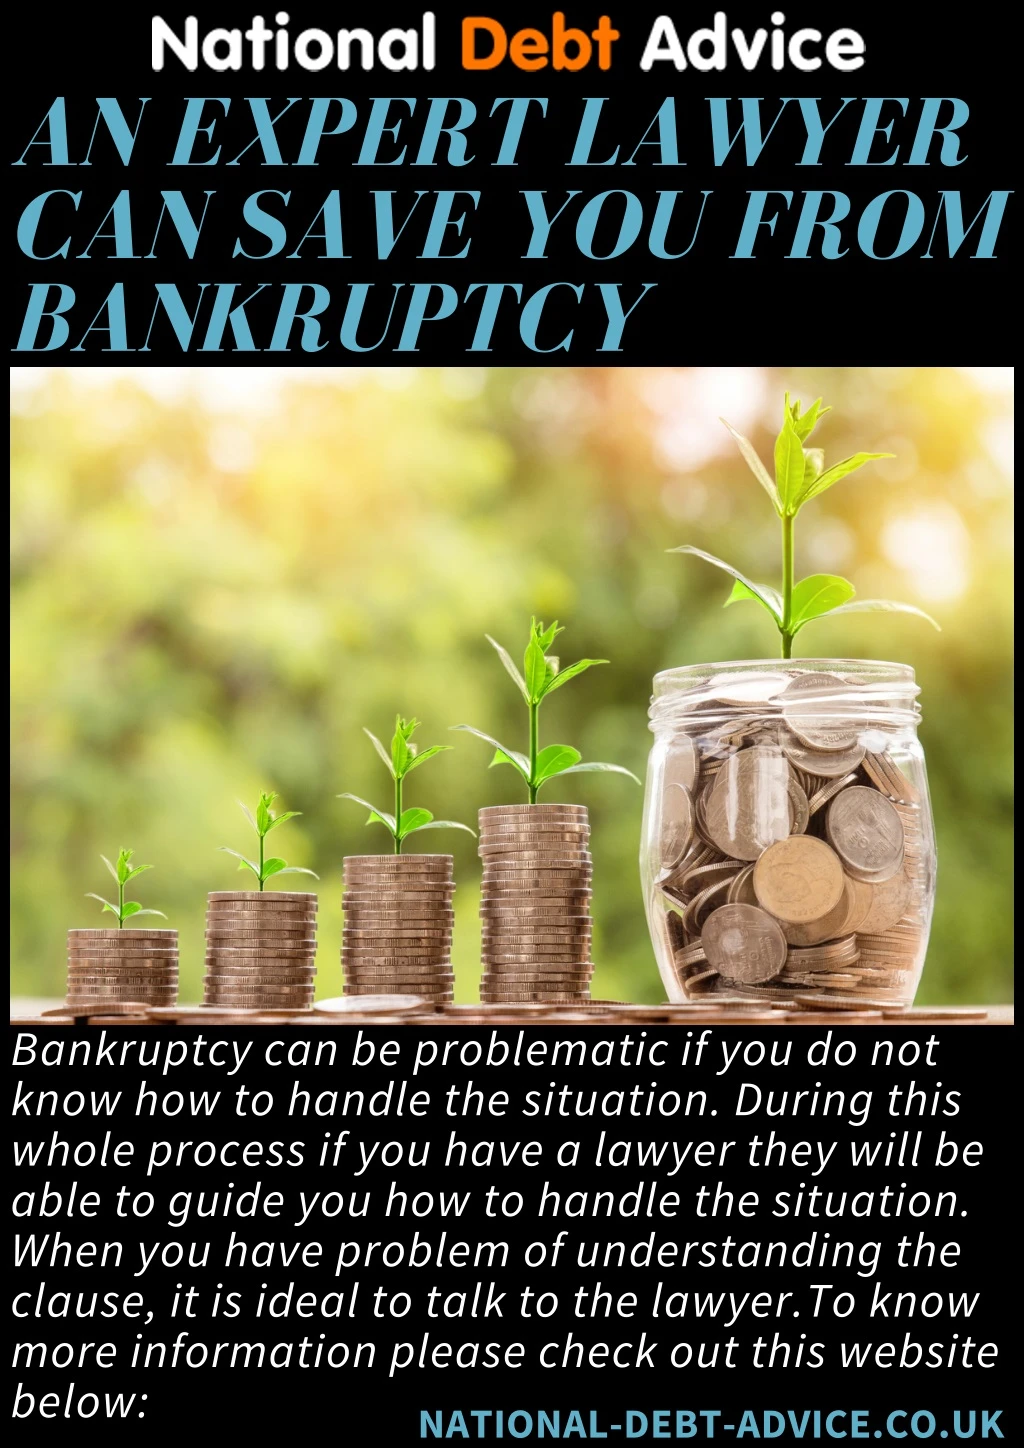 an expert lawyer can save you from bankruptcy